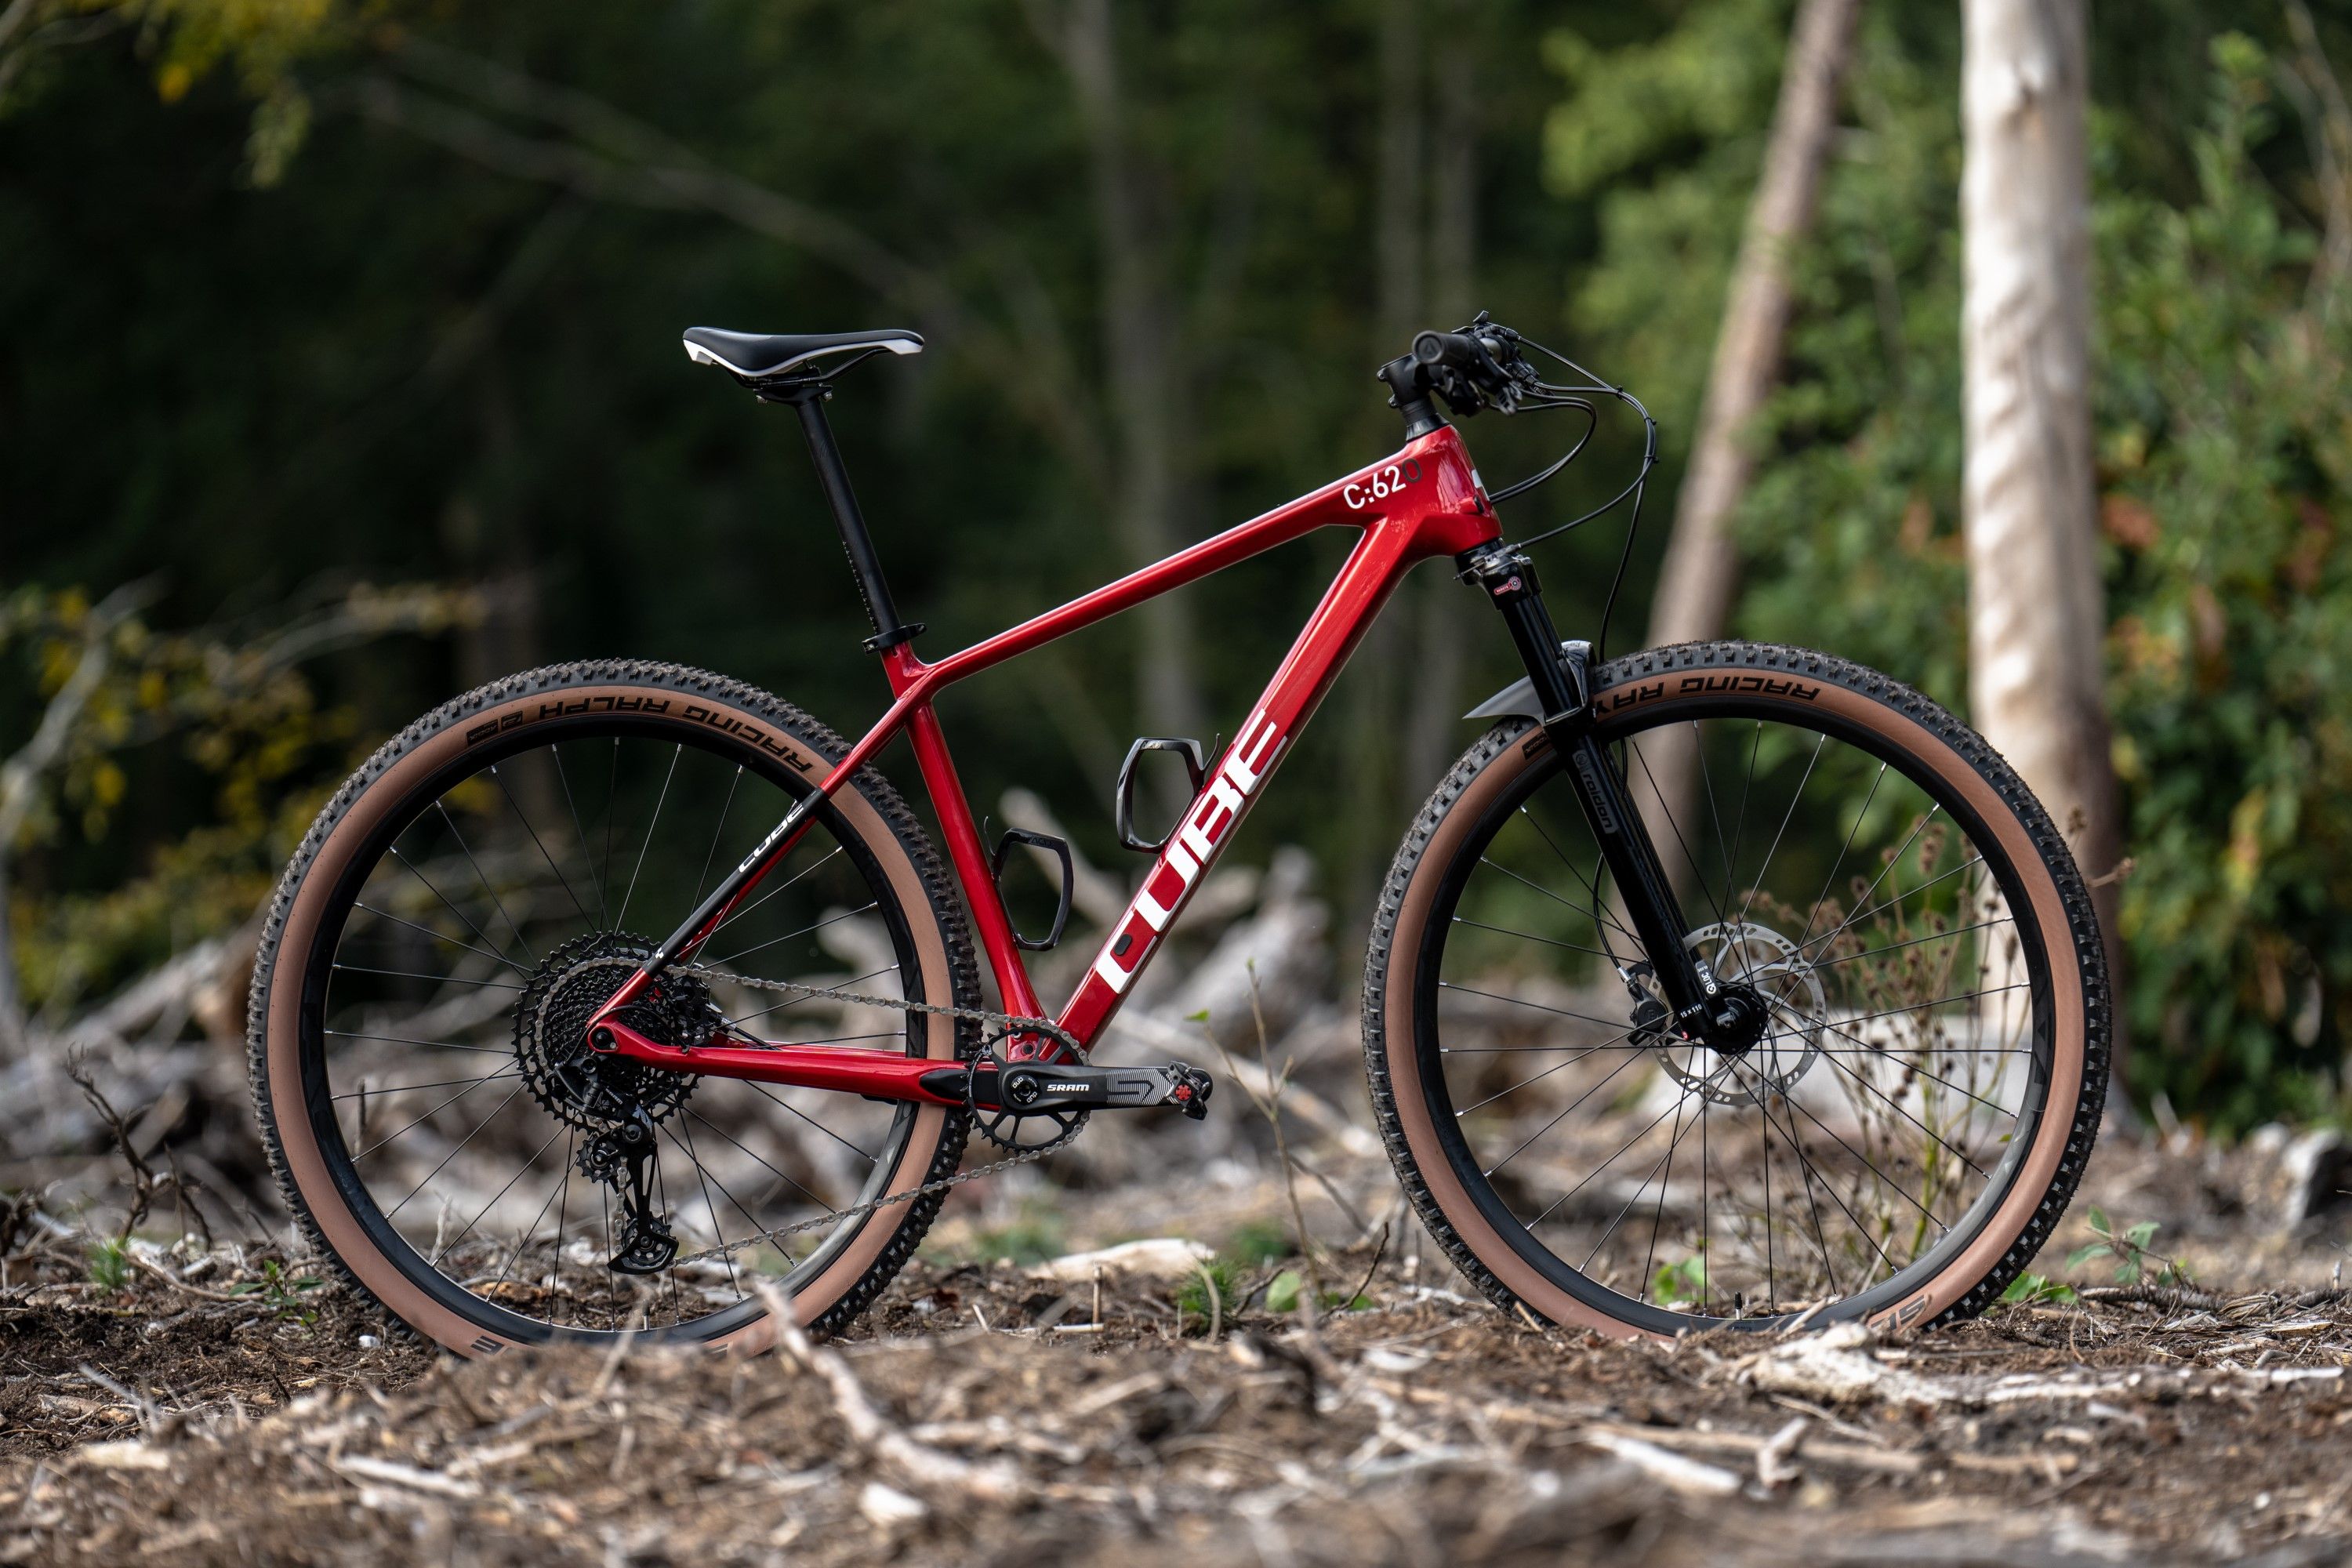 hond voor eeuwig emmer Review Cube Reaction C:62 One hardtail mountainbike